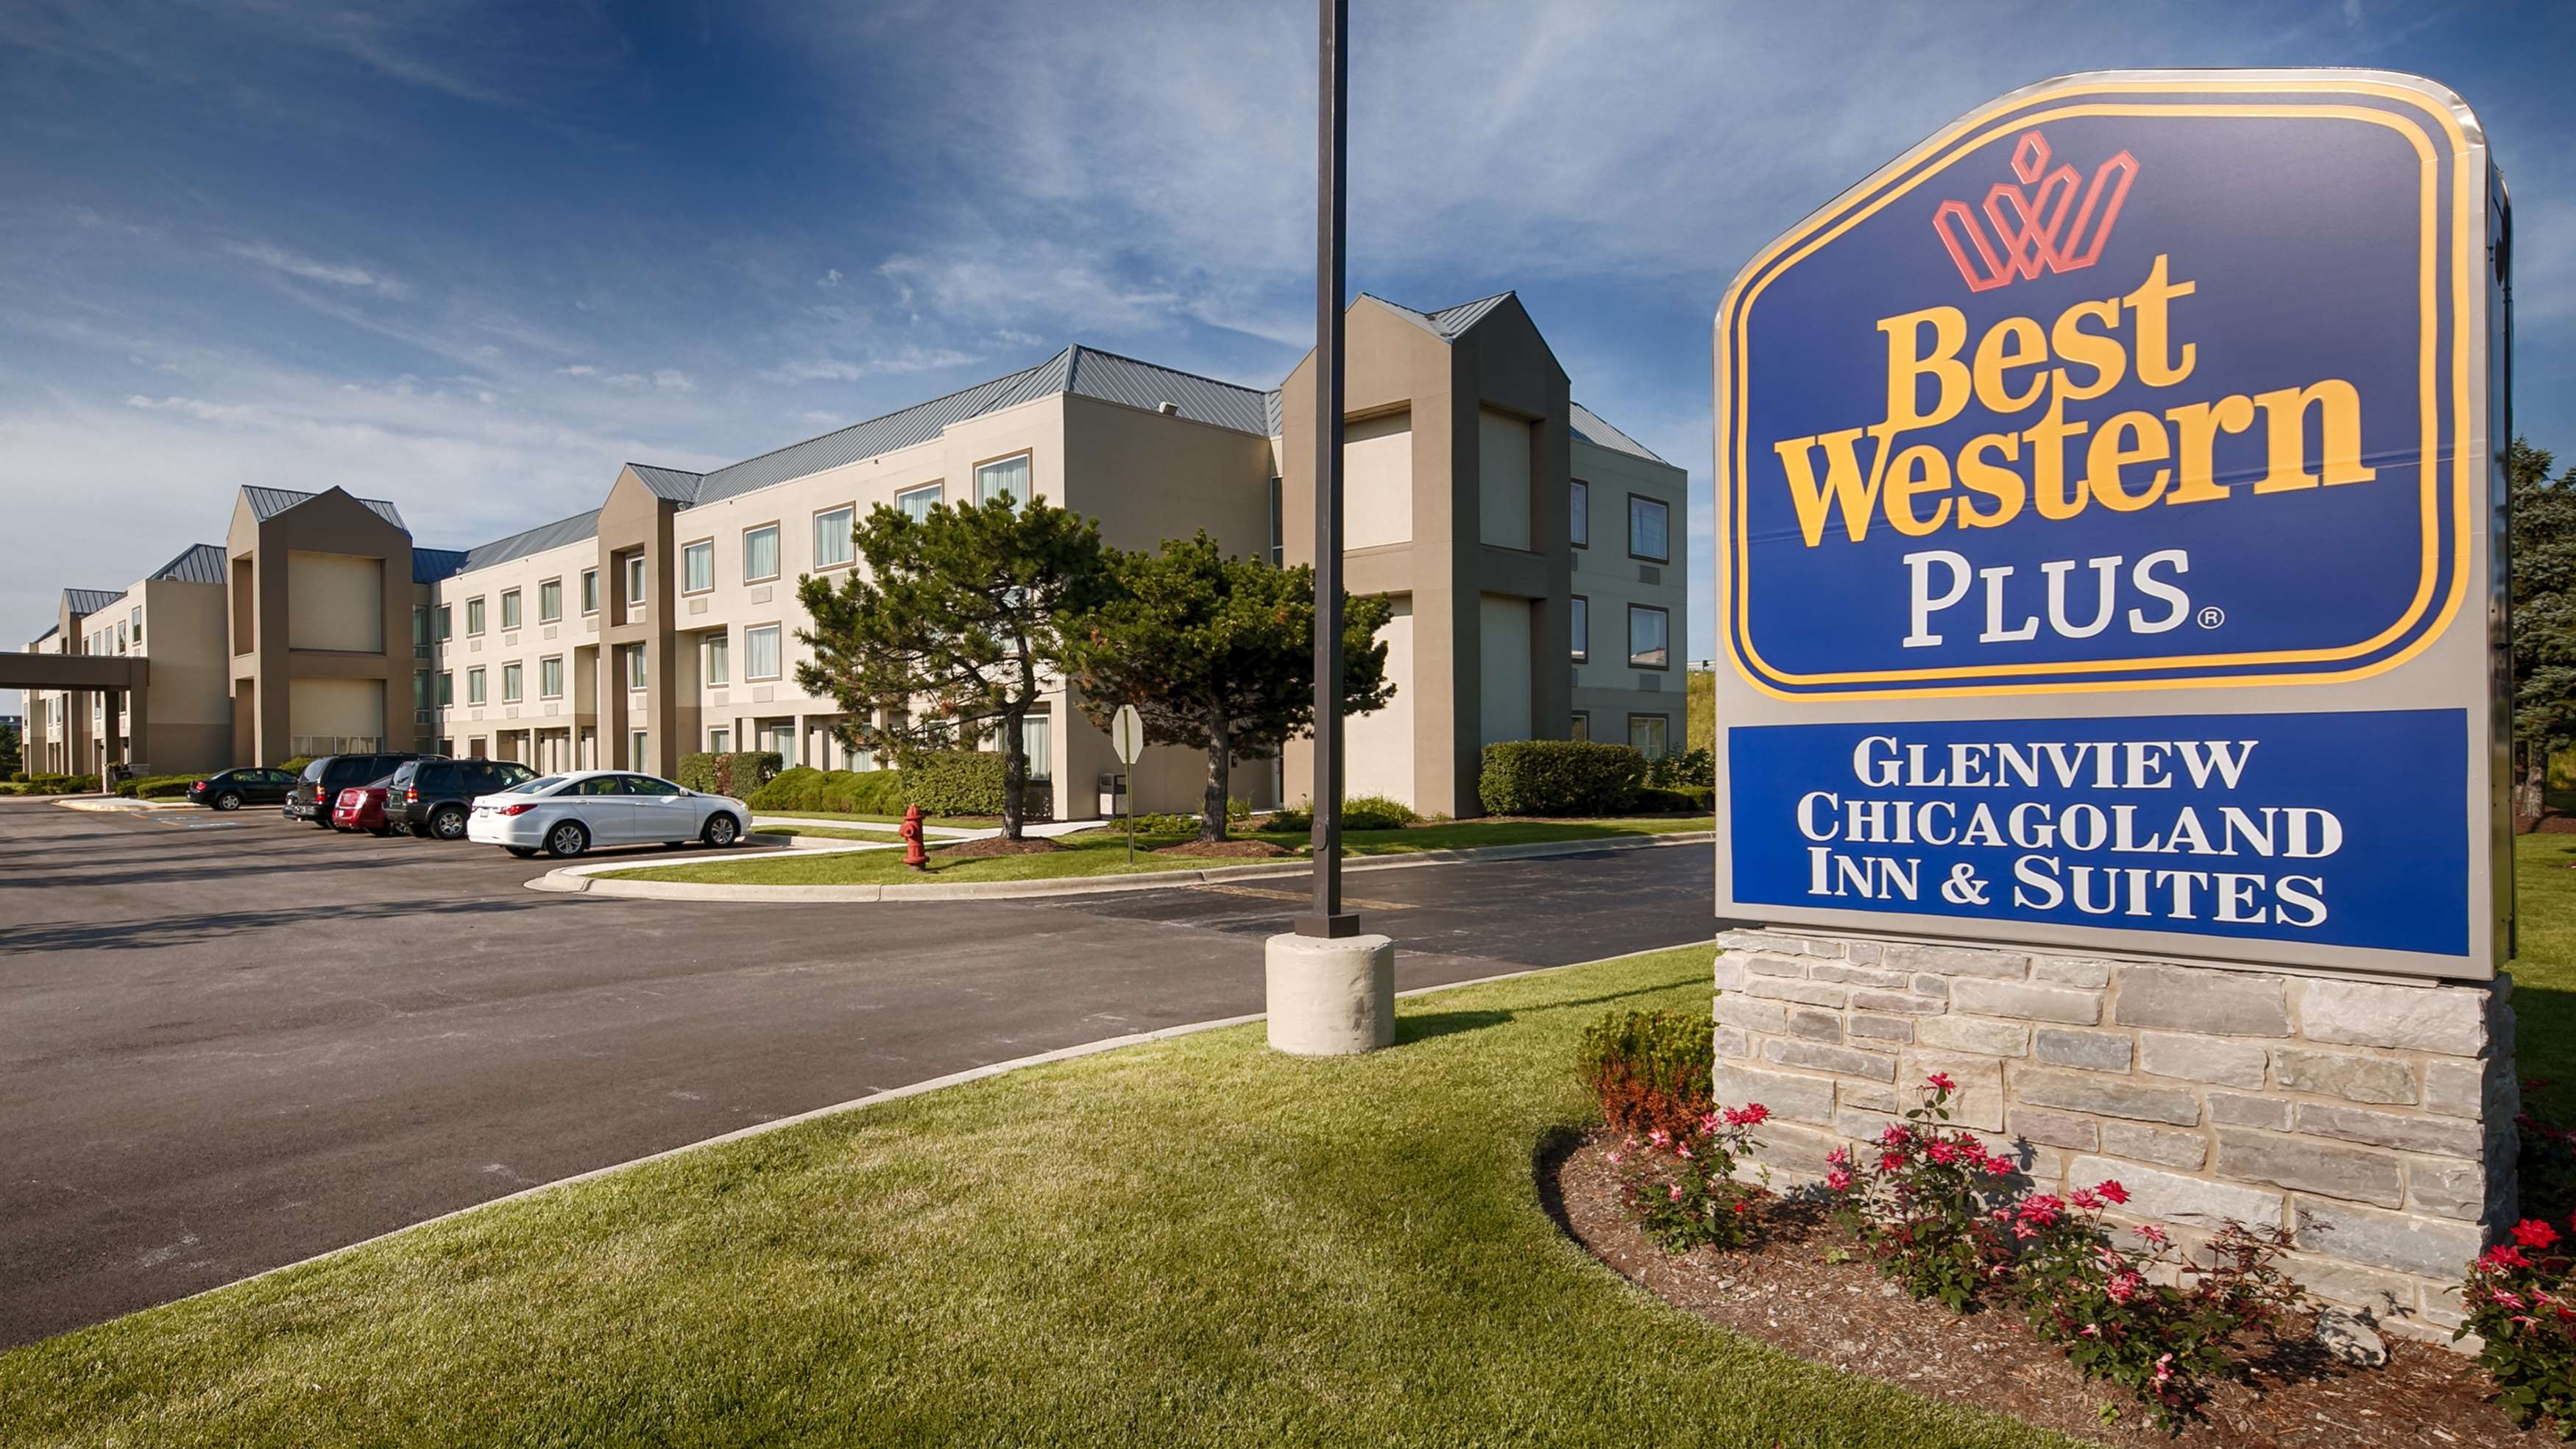 best western plus gle nview